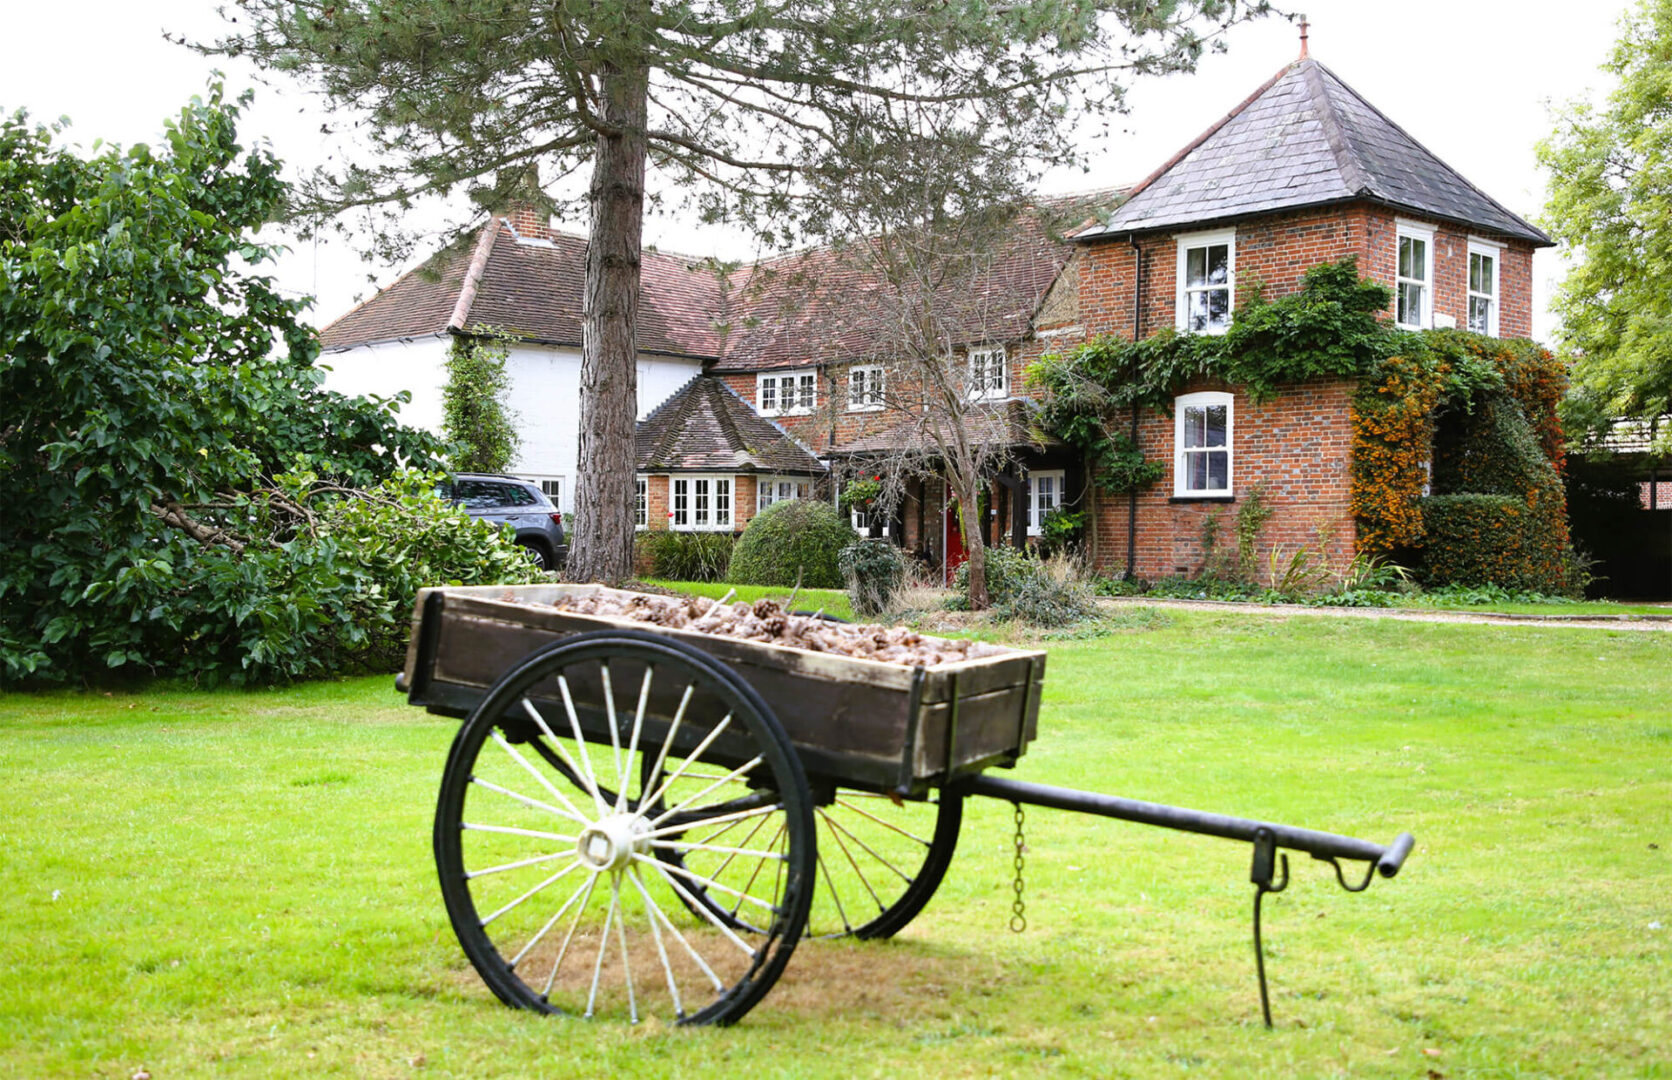 Self-Catering Cottages, Maidenhead | Sheephouse Manor Cottages house and barrow